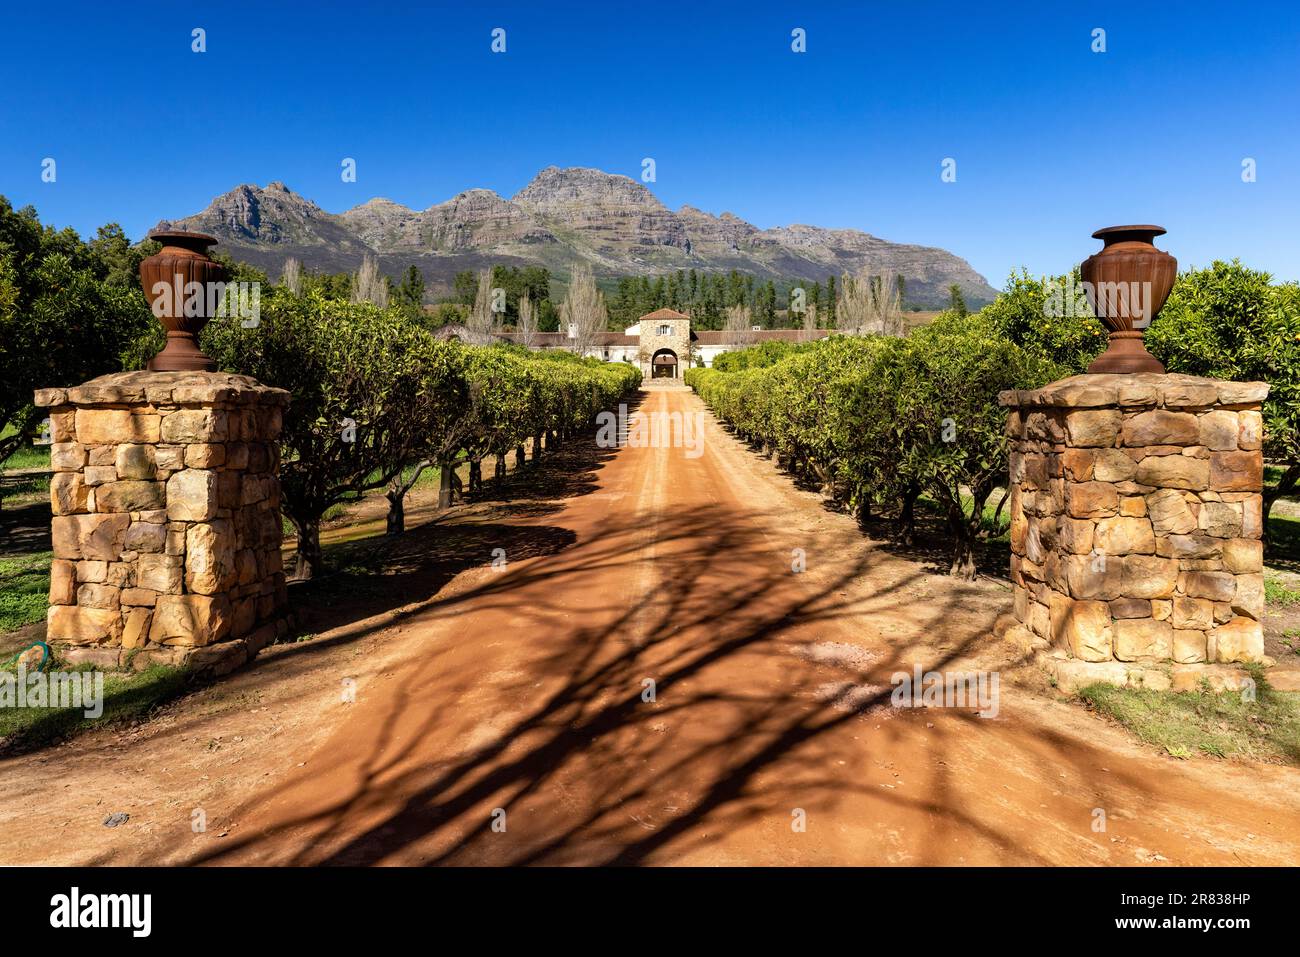 Entrance to the Waterford Estate in the Blaauwklippen Valley on the slopes of Helderberg Mountain - Stellenbosch, Winelands near Cape Town, South Afri Stock Photo